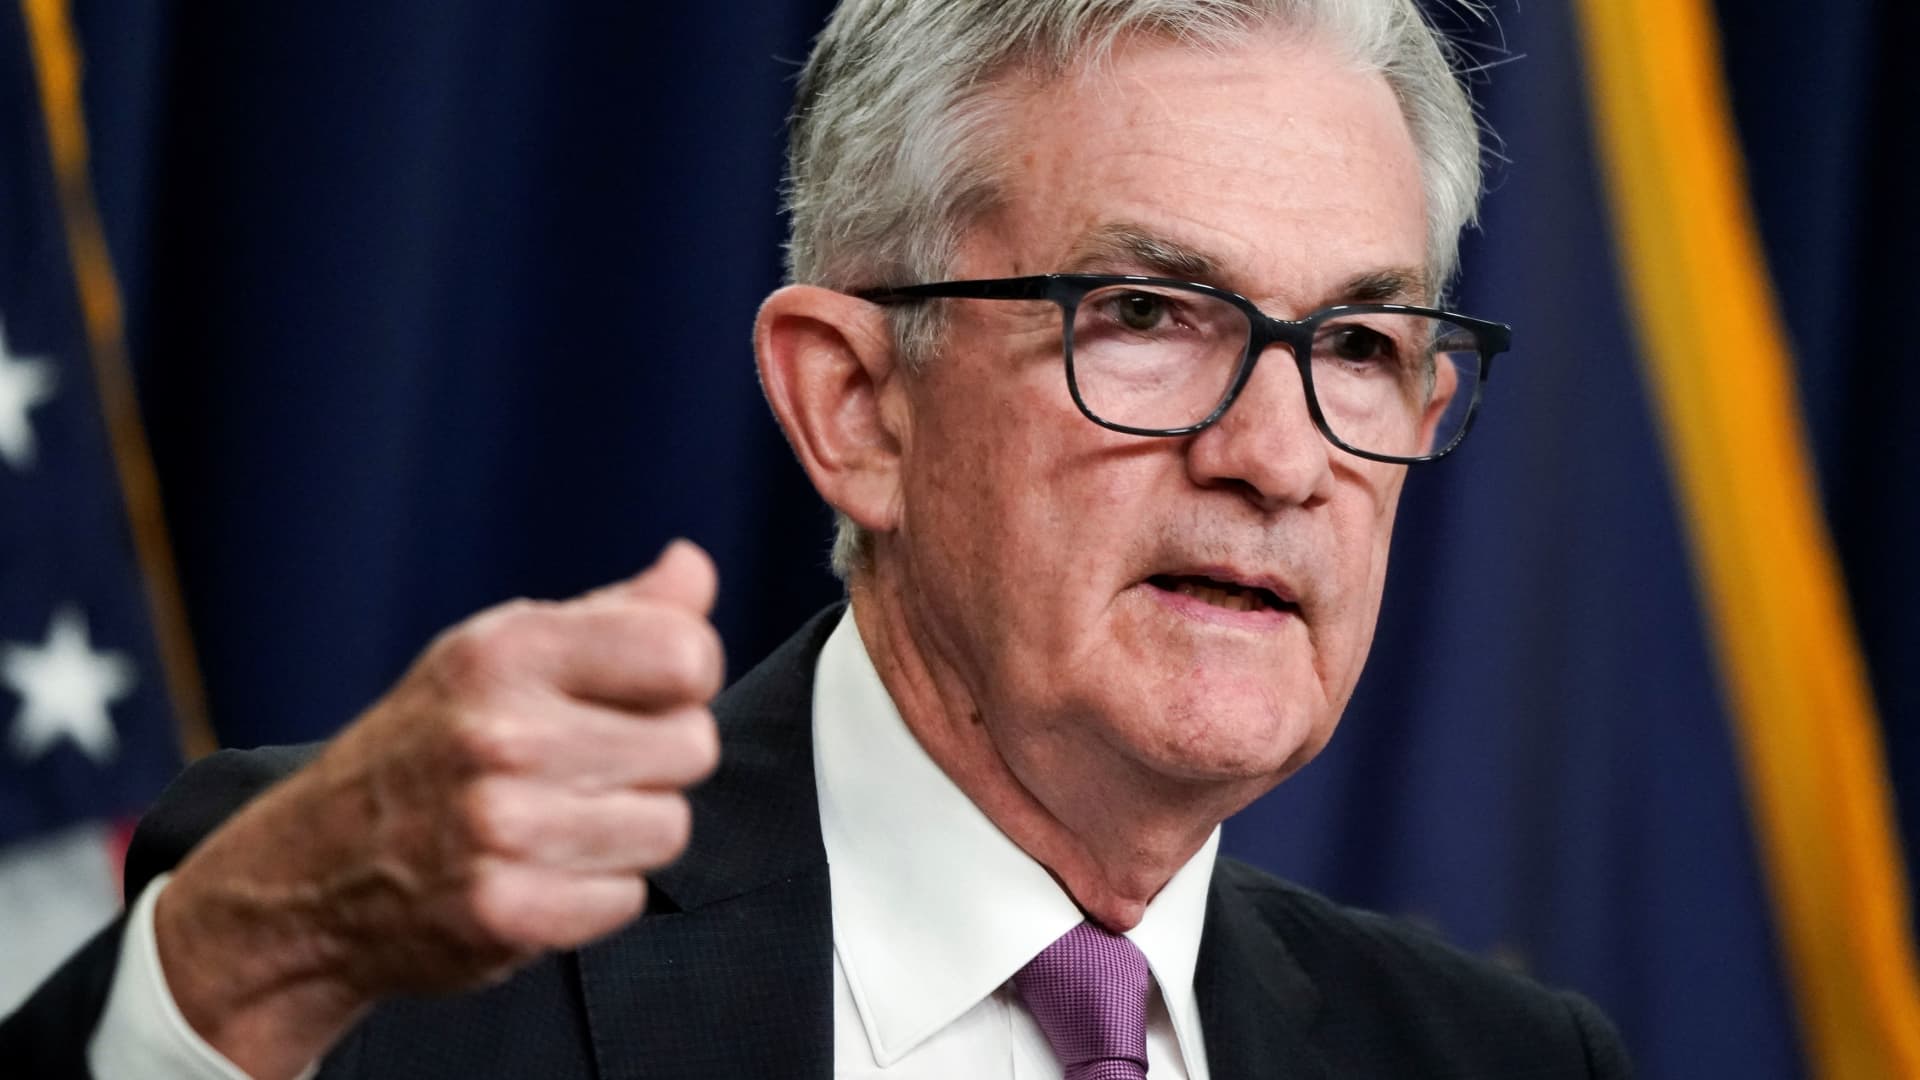 Powell isn't likely to tell investors what they want to hear Friday